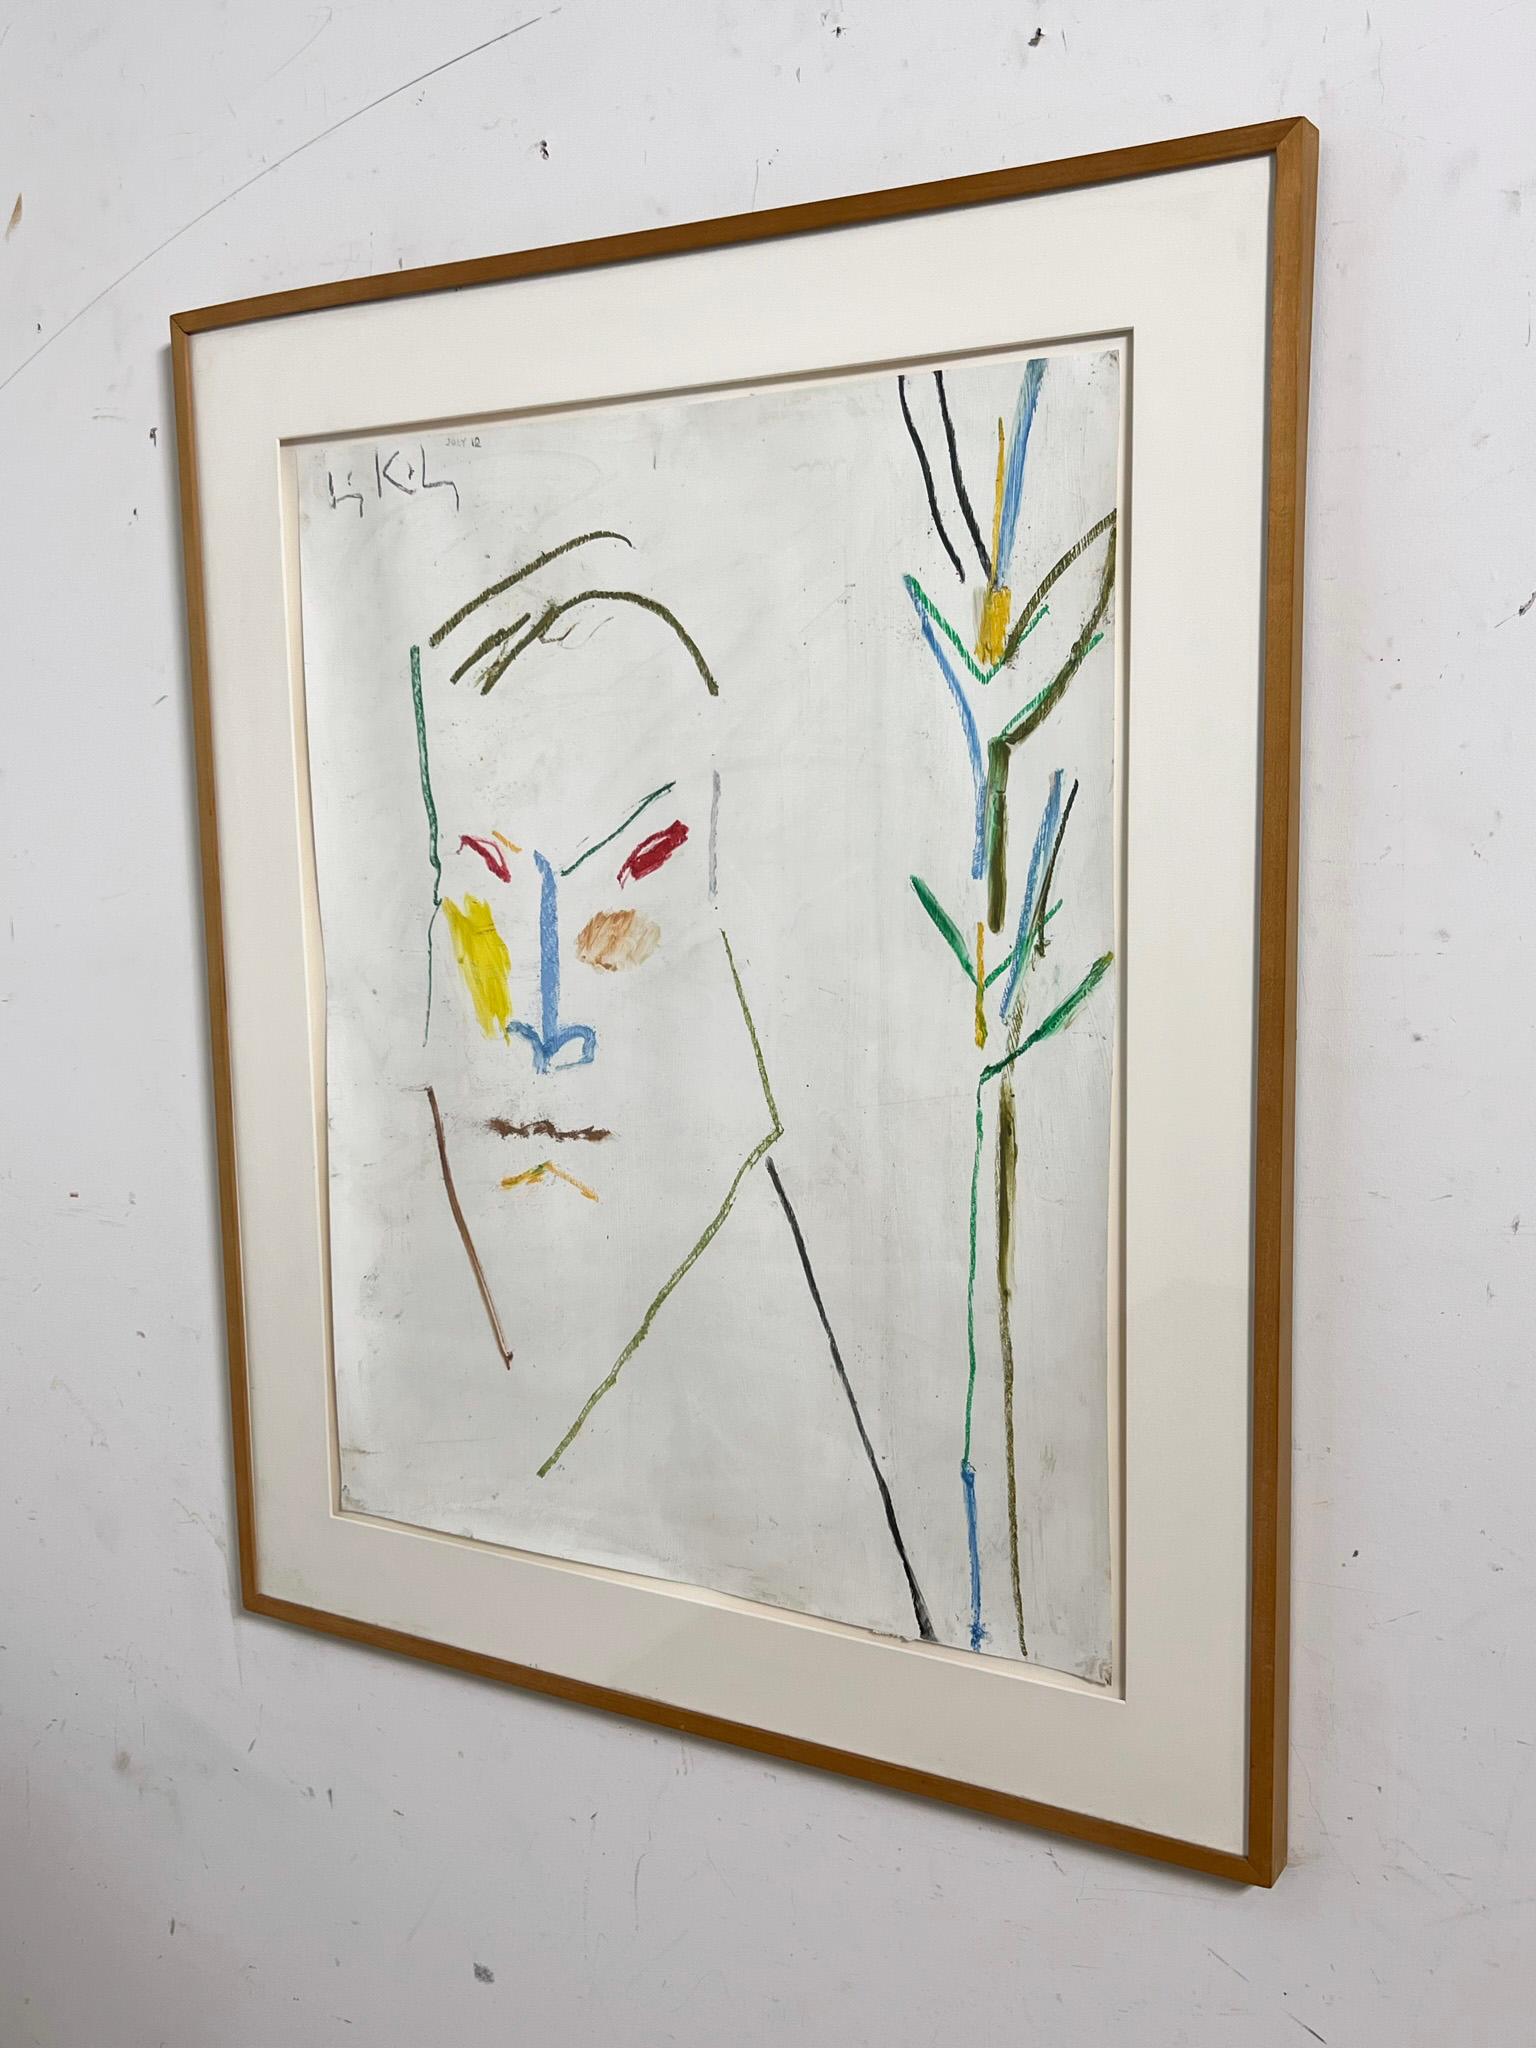 Oil crayon on paper by listed Figurative Expressionist artist Irving Kriesberg dated 2012. Early in his career, Kriesberg was included in The Museum of Modern Art’s 1950s exhibition “15 AMERICANS” along with Jackson Pollack, Mark Rothko, and